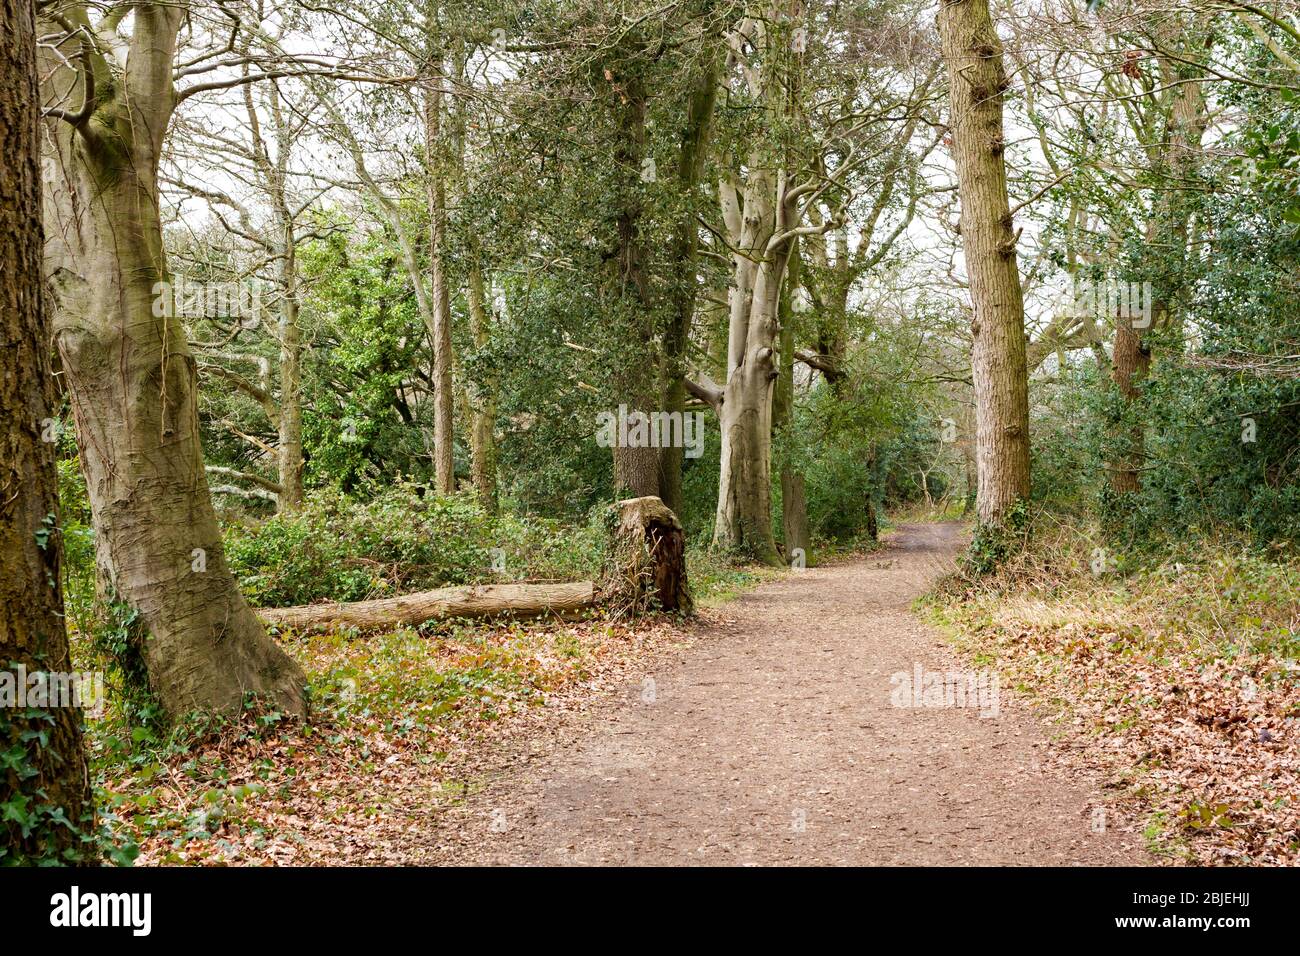 Woodland scene at Upton Country Park in Dorset, England Stock Photo